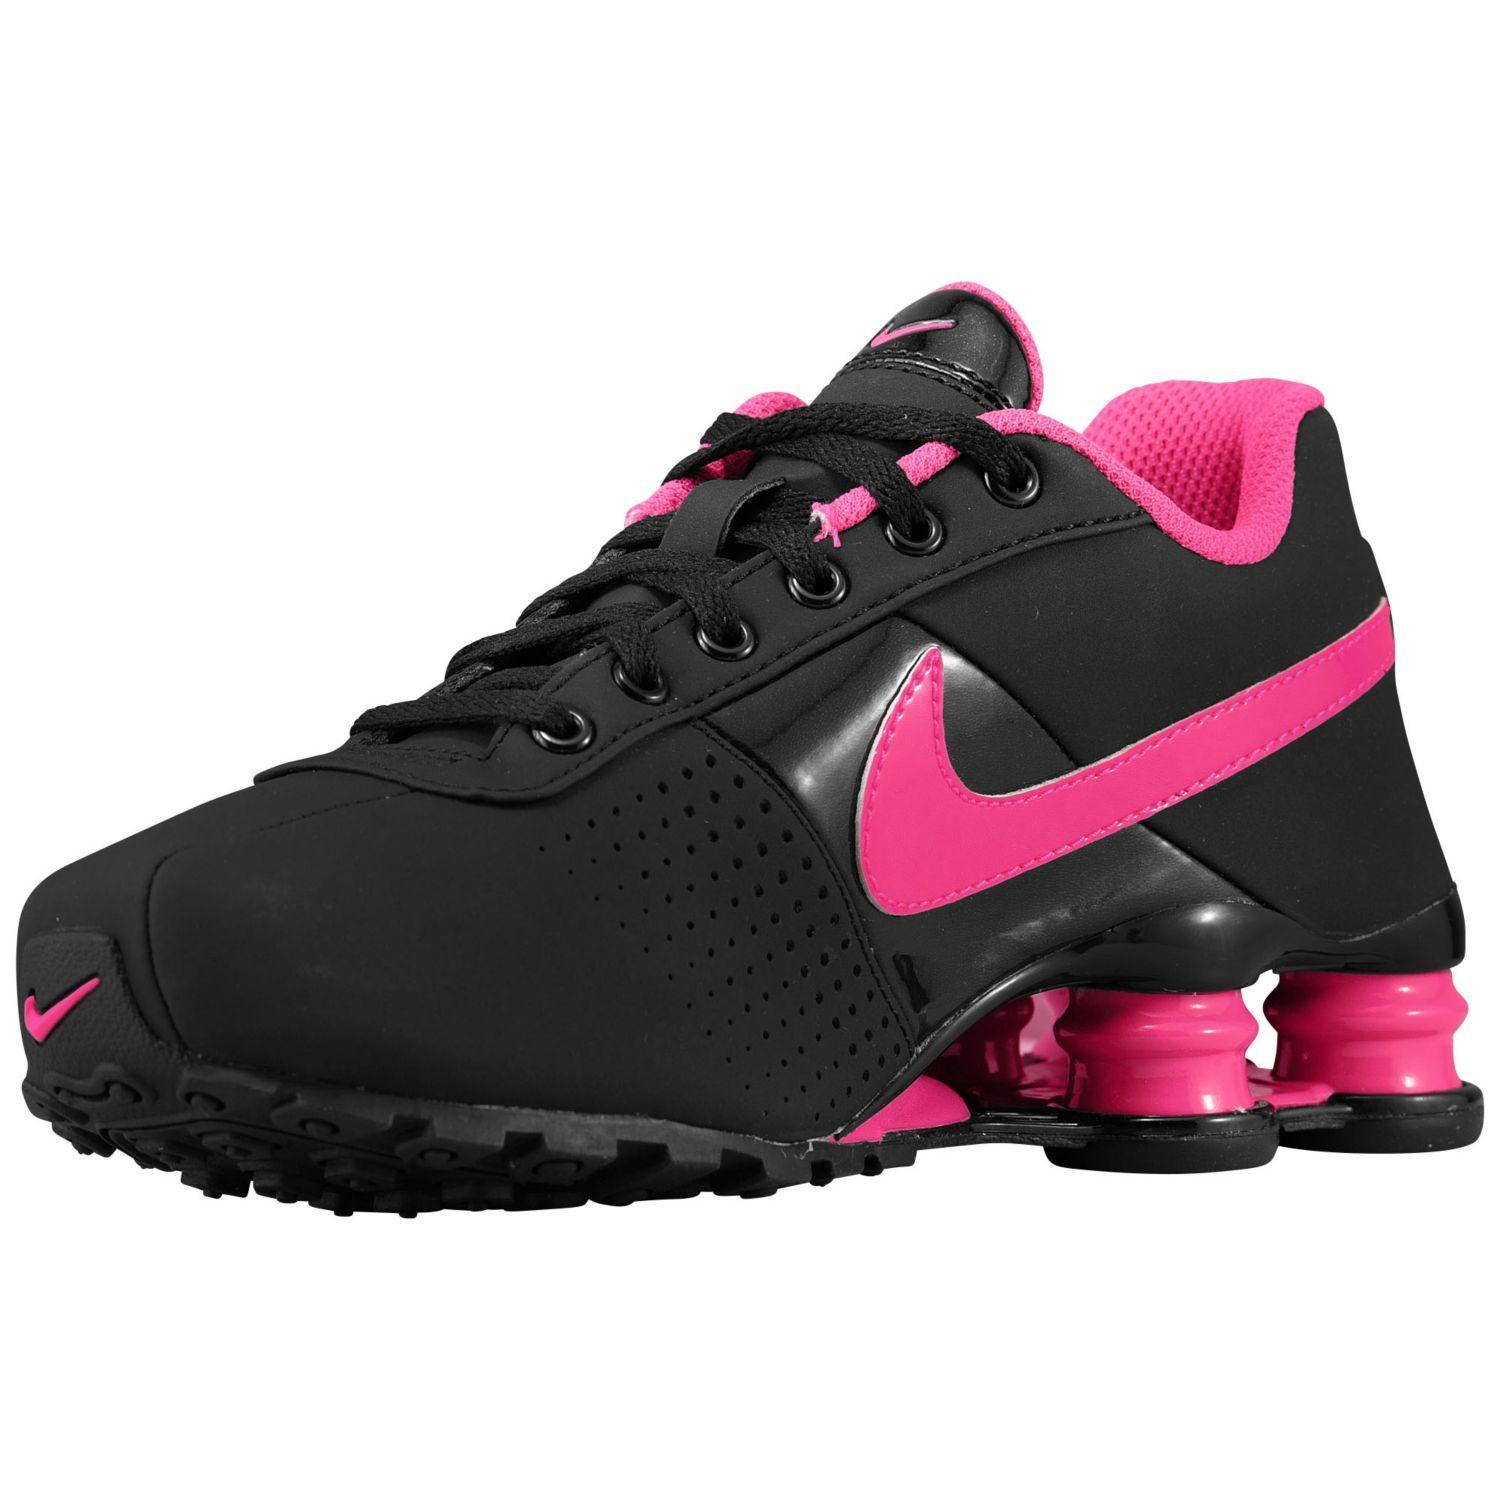 Pink and Black Nike Logo - Hot Pink Nike Shox Shoes. The Centre for Contemporary History